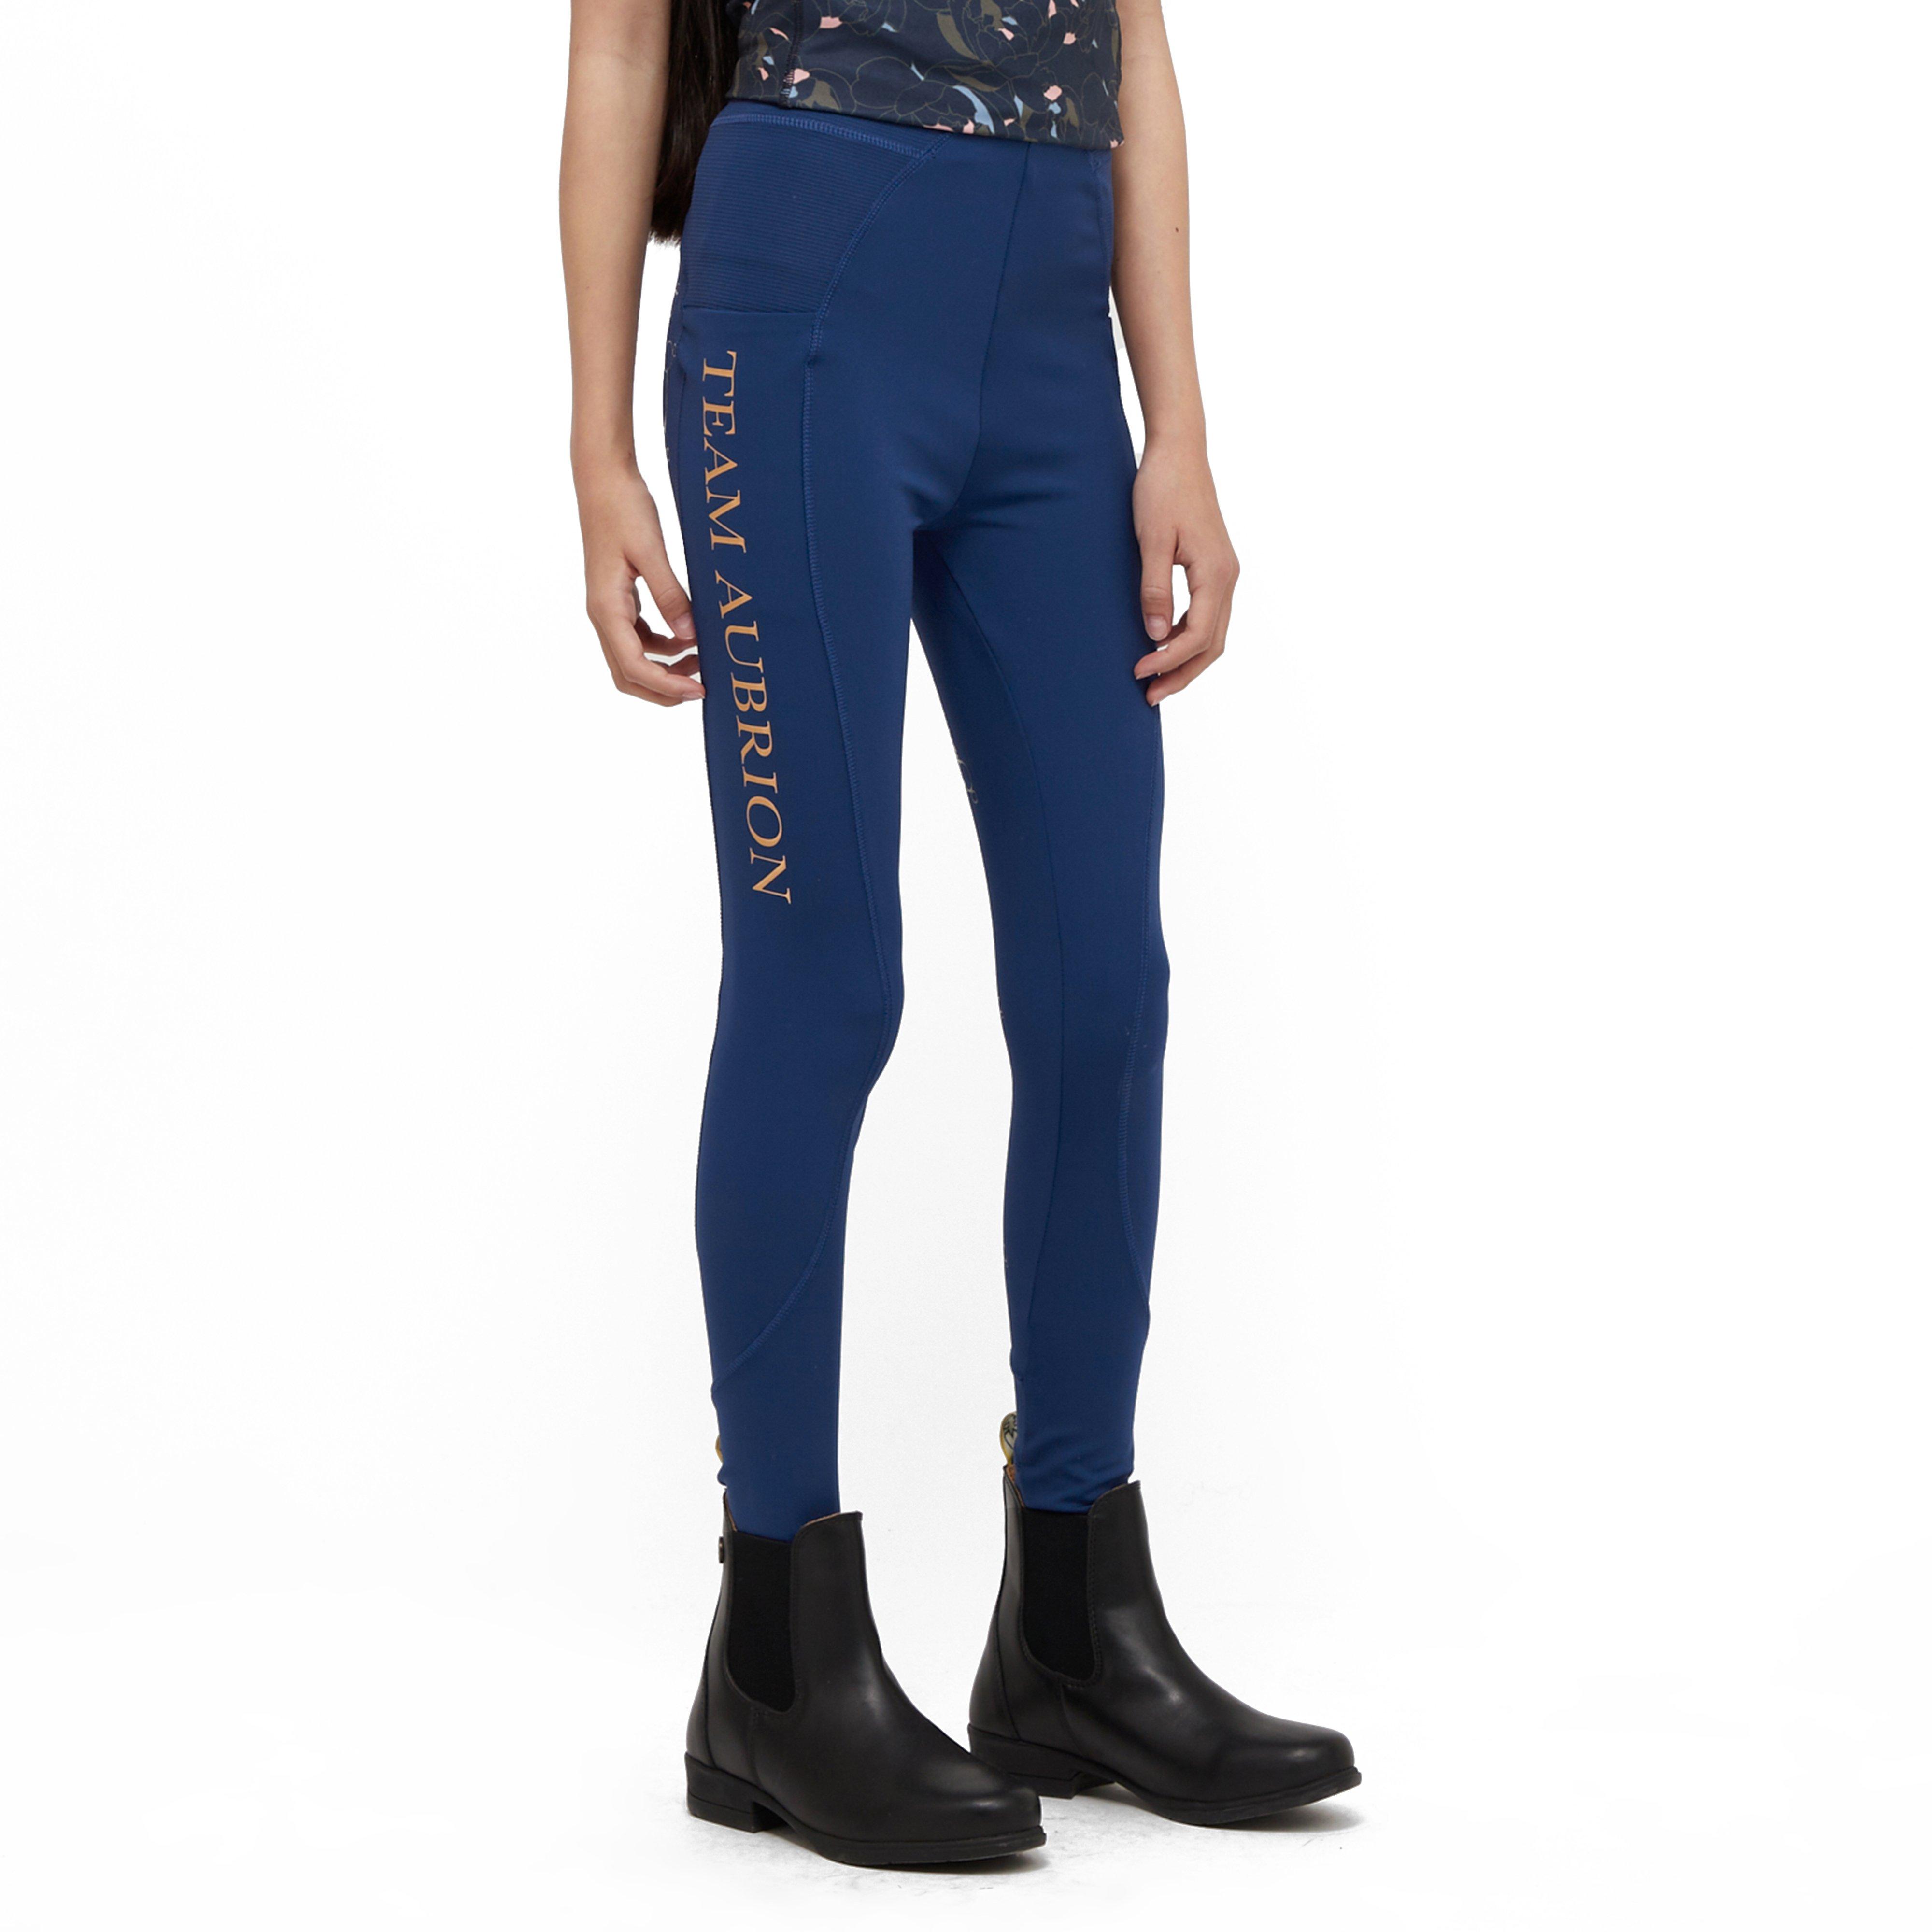 Young Rider Team Riding Tights Navy